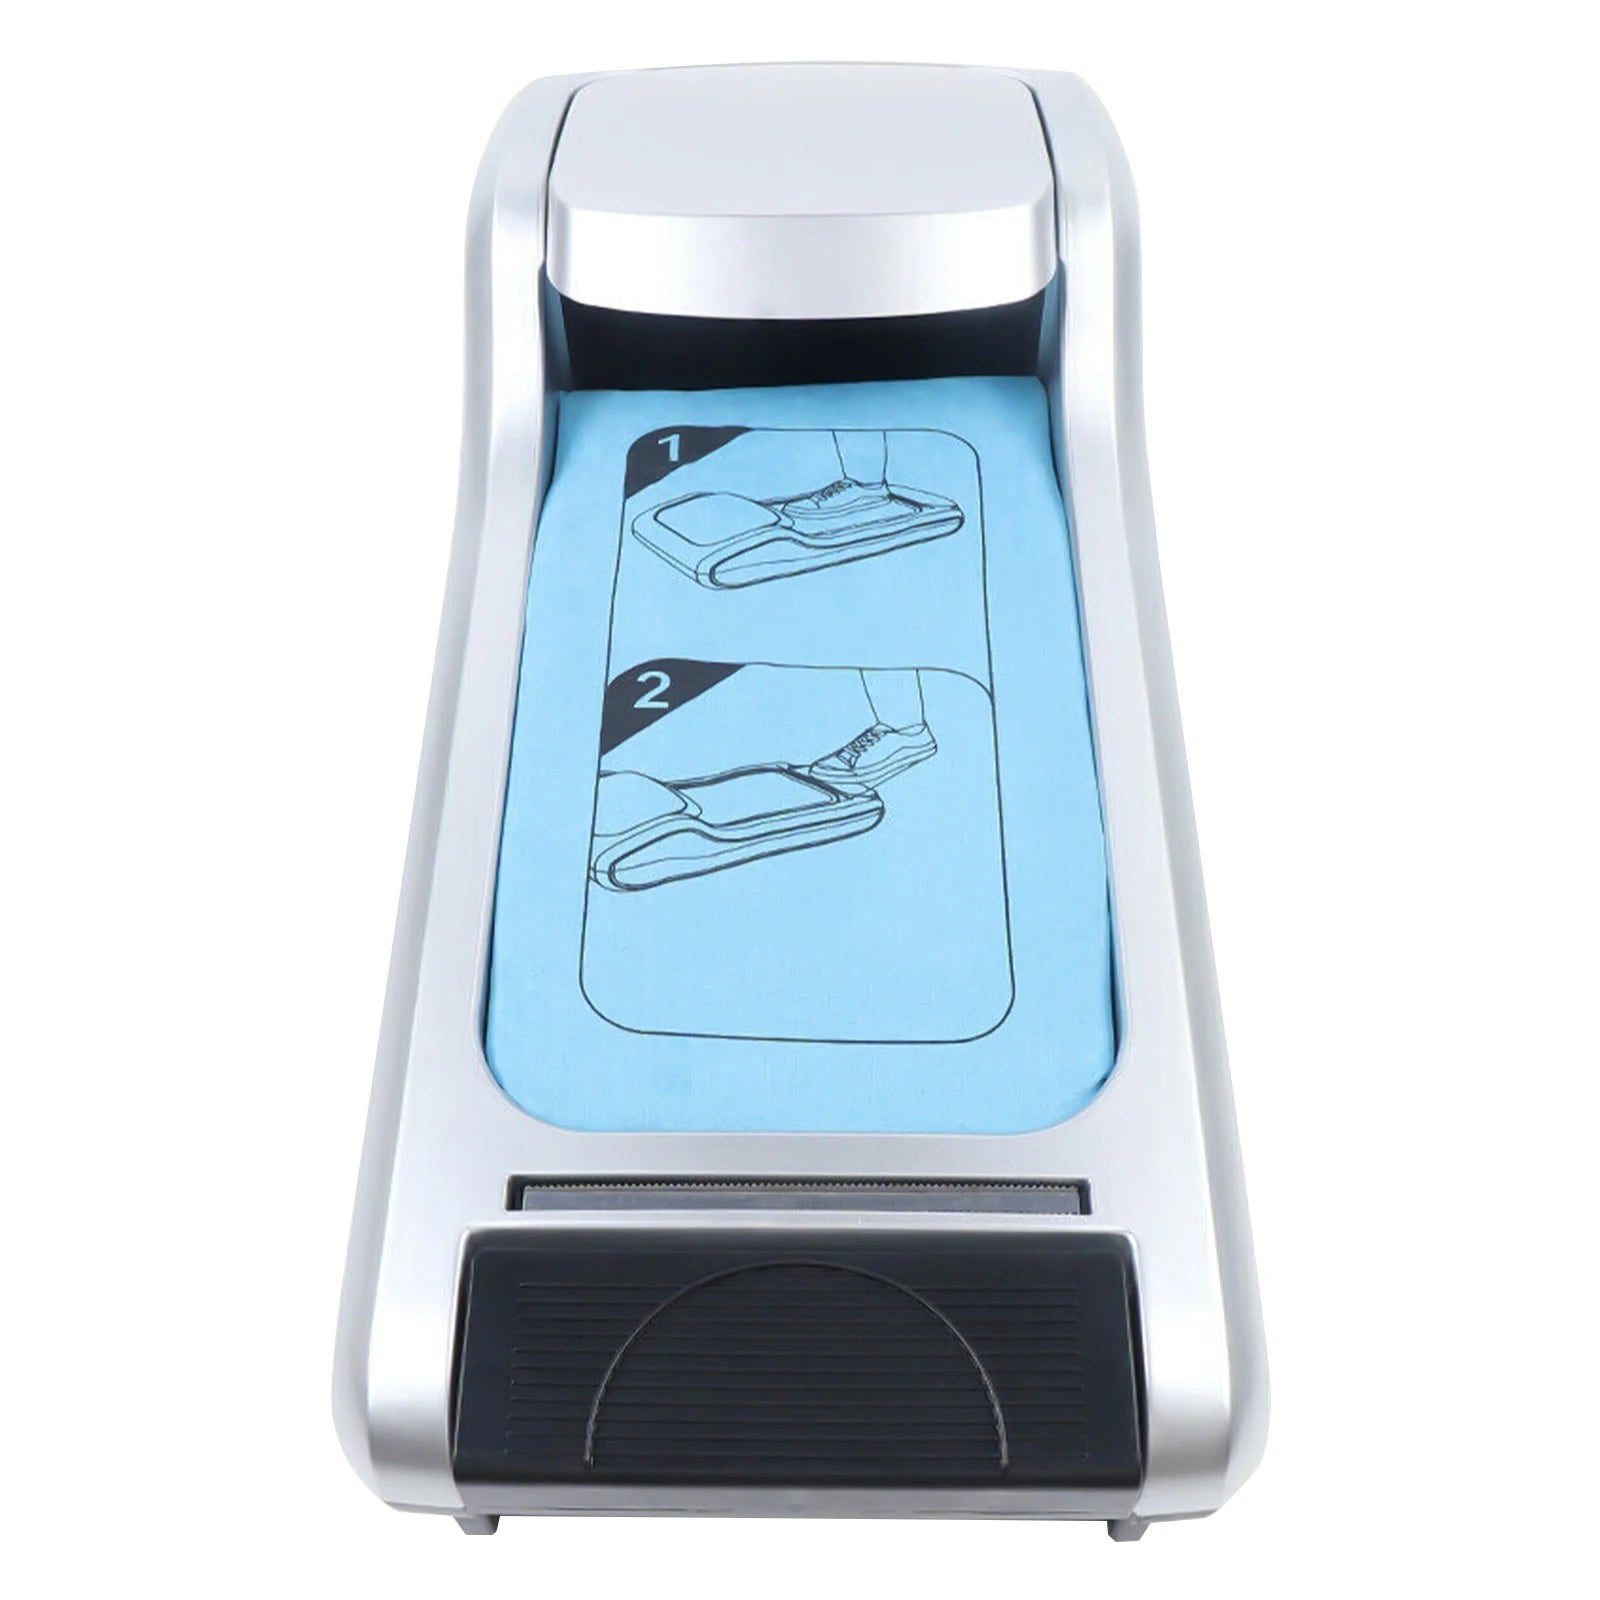 Automatic Shoe Cover Dispenser Machine - Hands-free device that dispenses disposable shoe covers for hygiene and cleanliness.